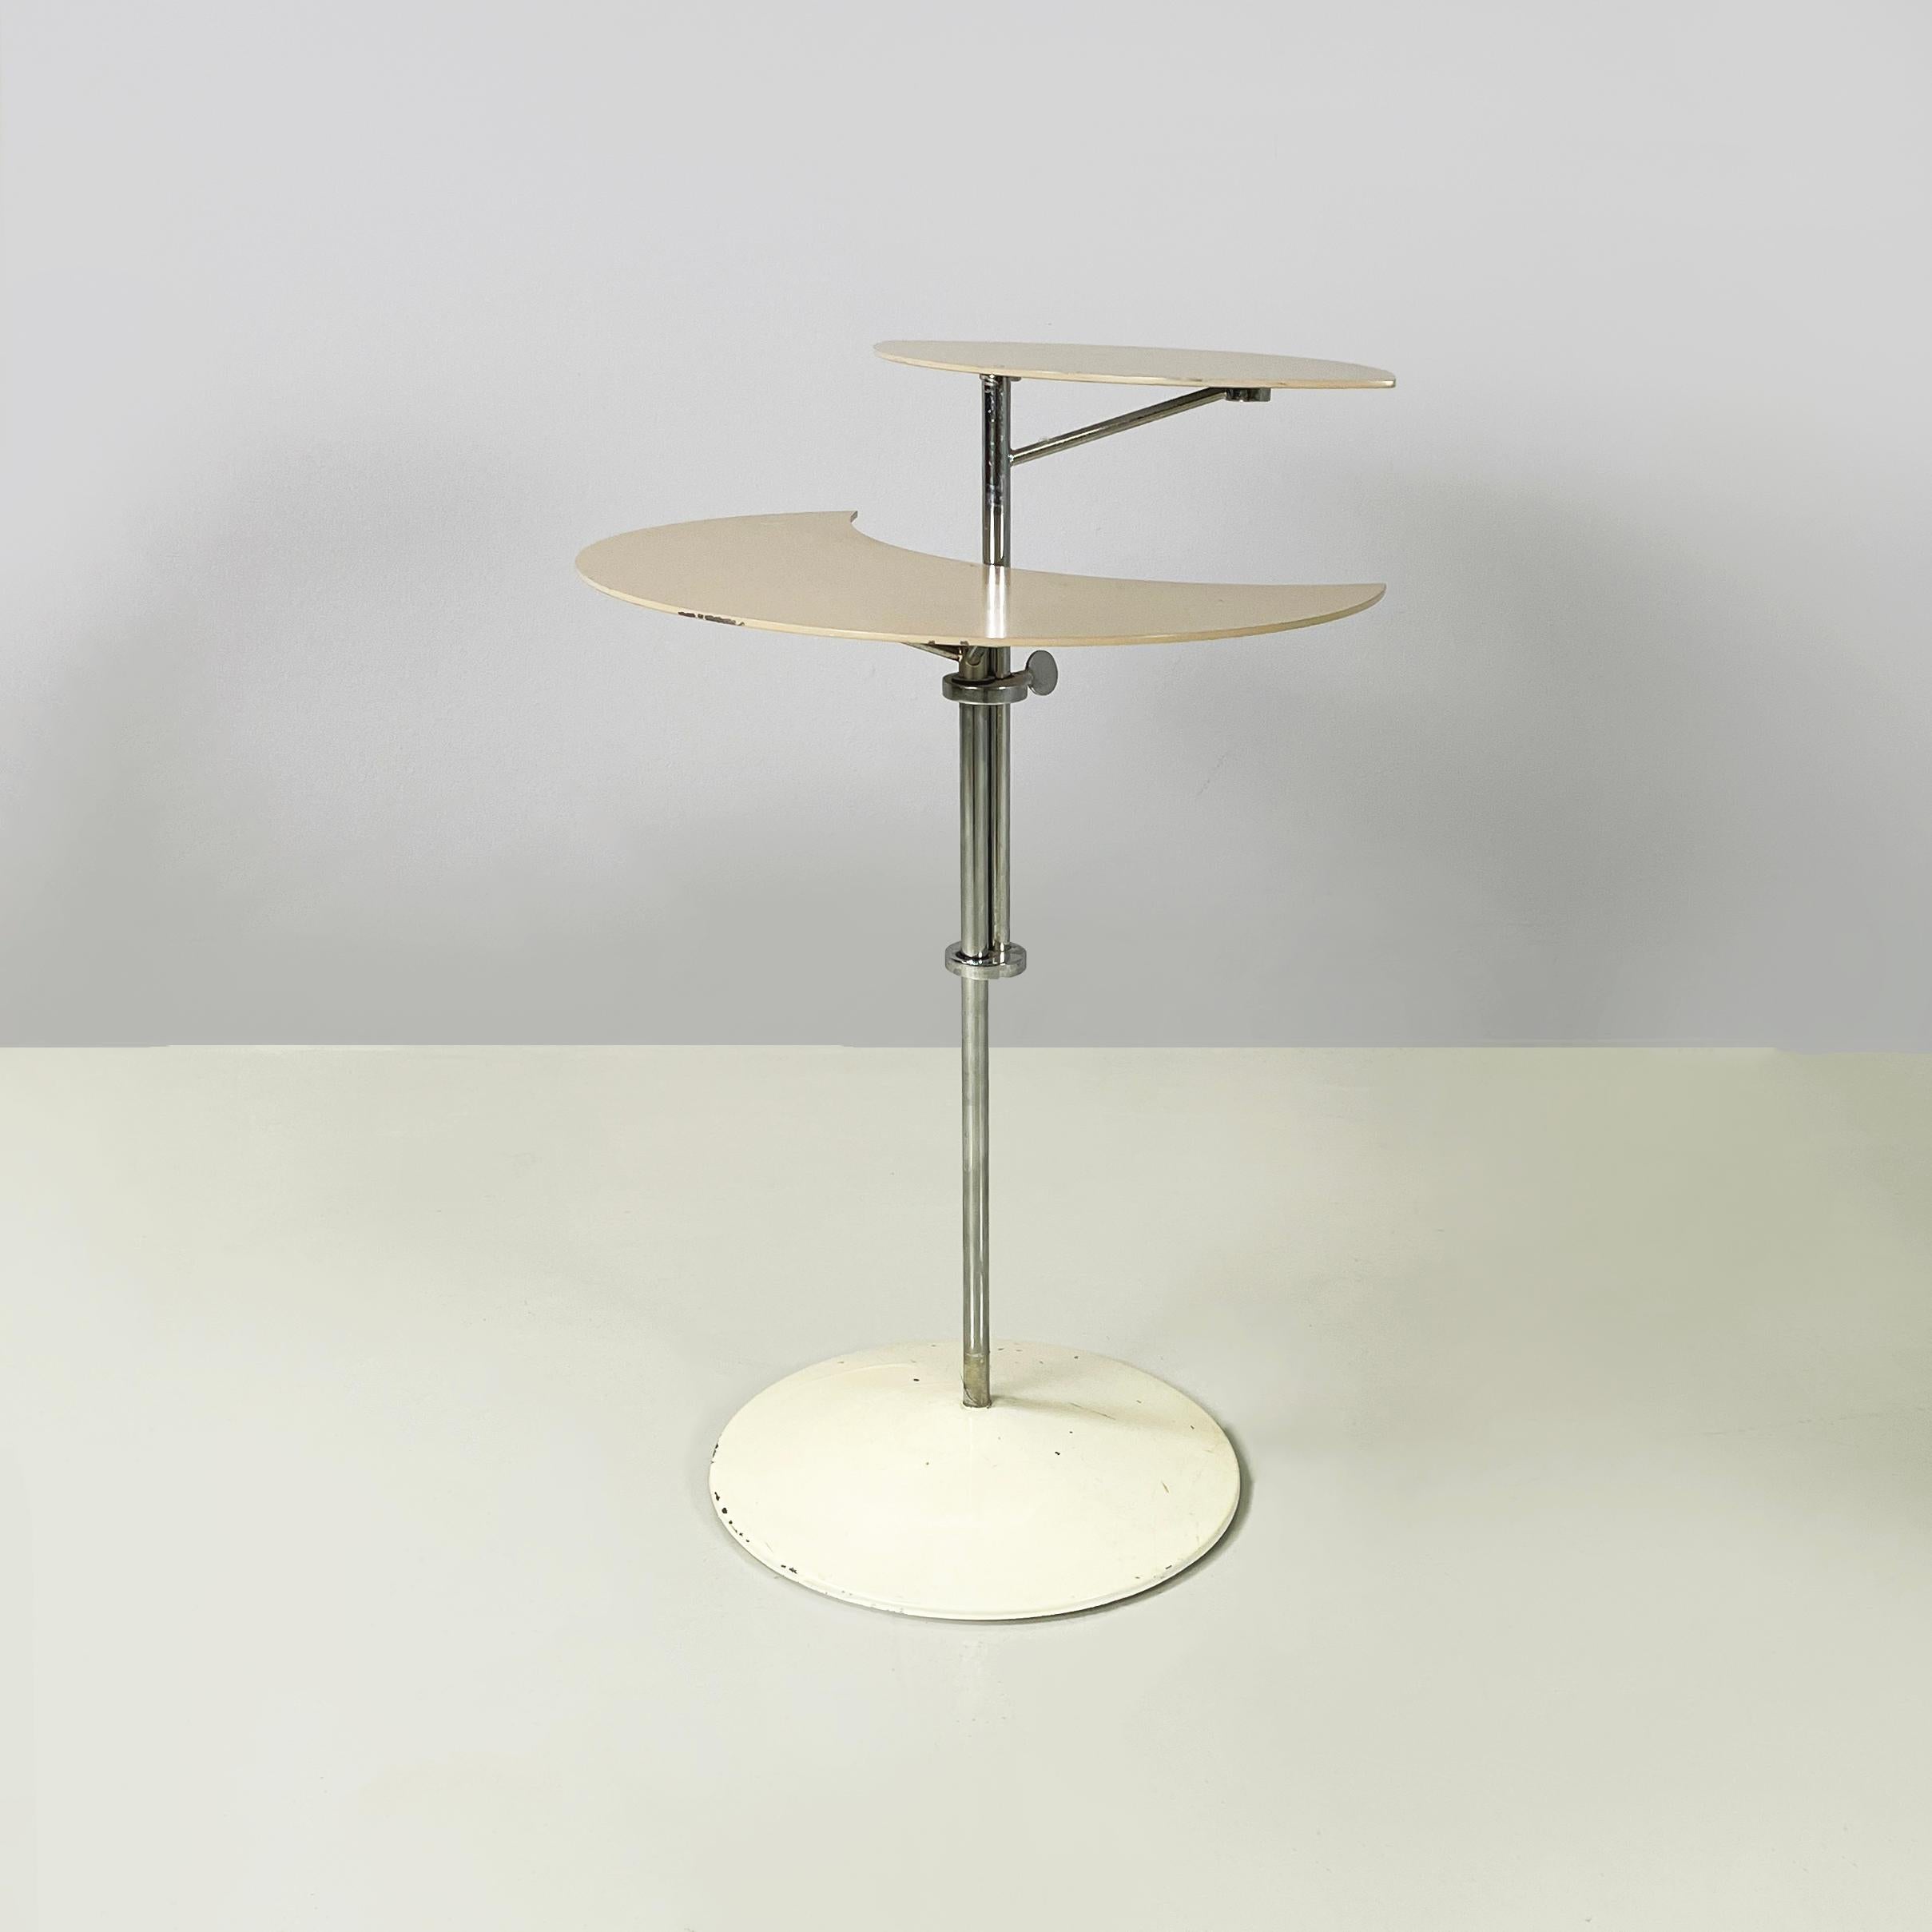 Italian modern Gray and white metal round coffee table with double shelf, 1990s
Coffee table with double shelf in gray-beige painted metal. The two tops are positioned at different heights and are complementary in shape. The structure is made of